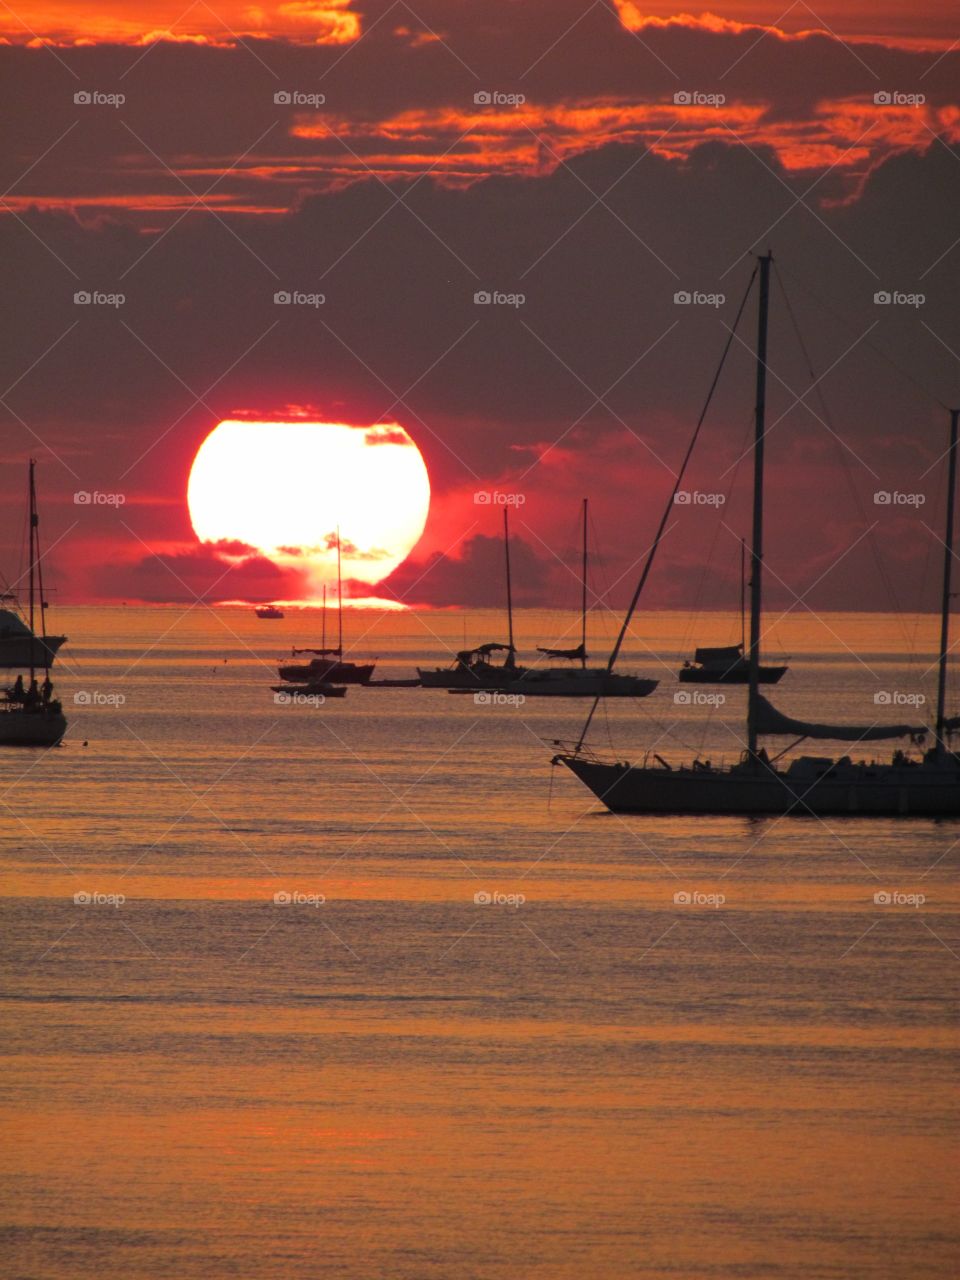 Large sun setting over water colorful sky and reflecting on the water. Boats at anchor. 